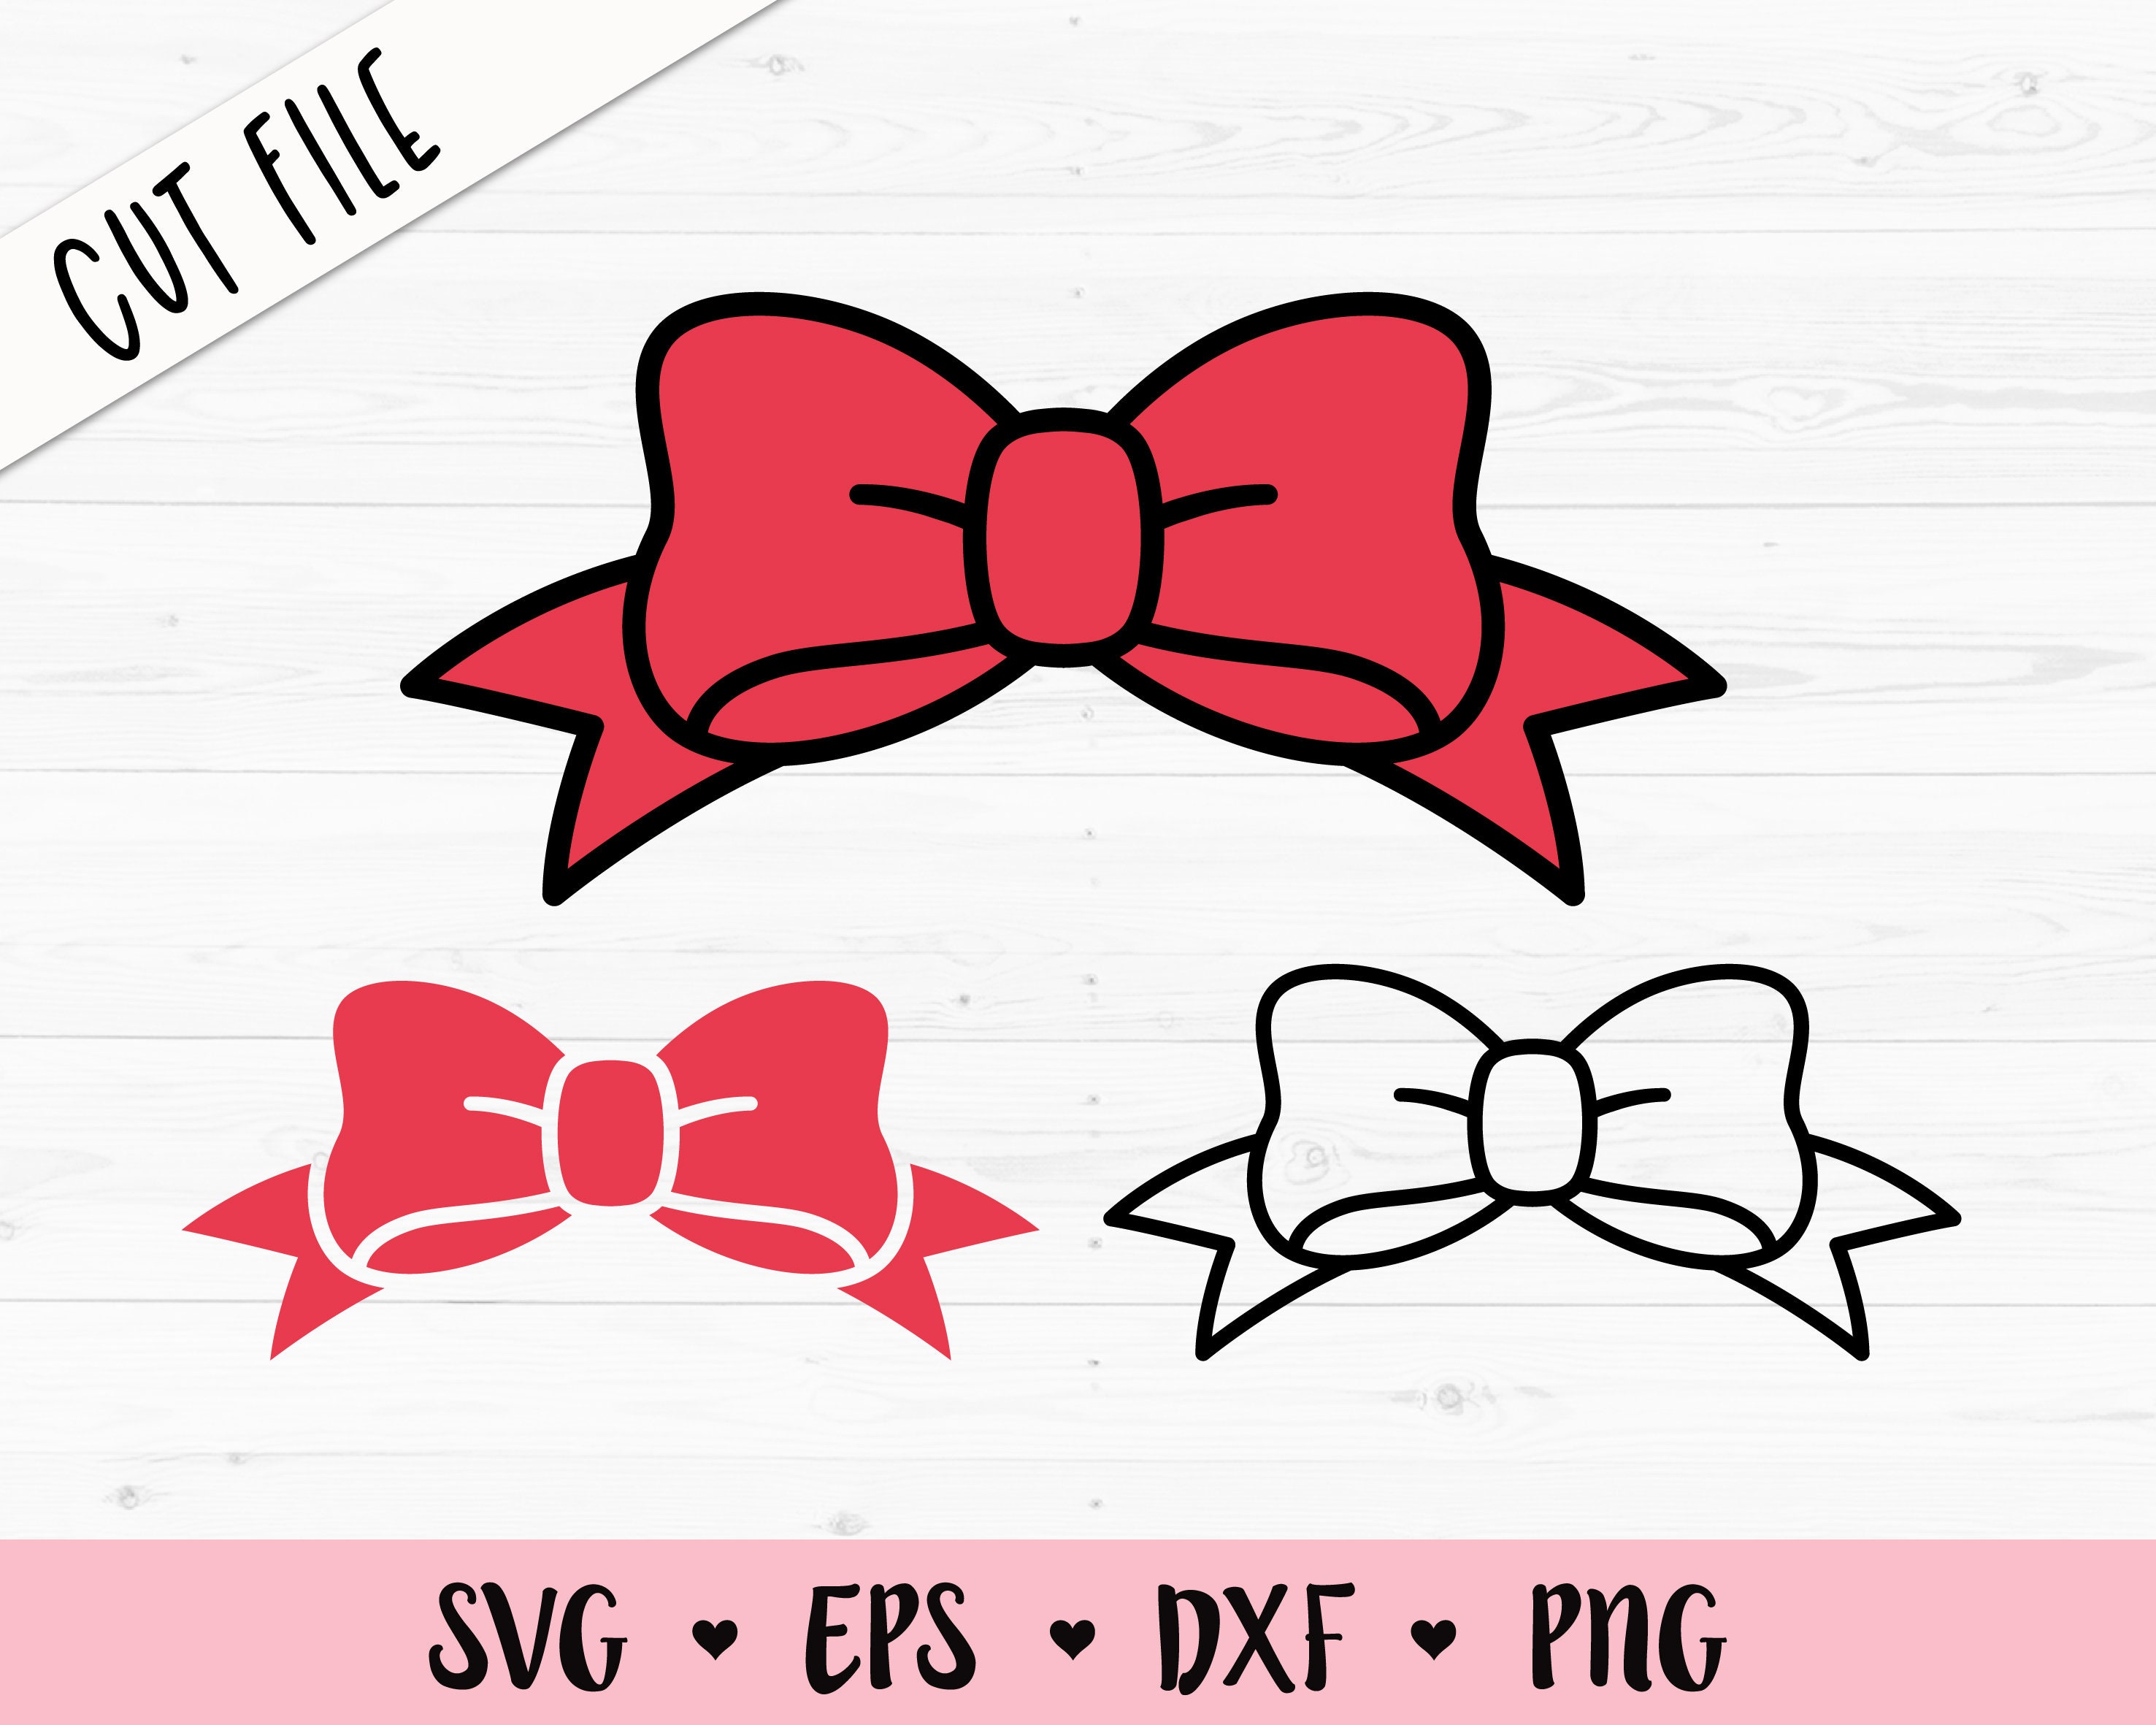 How To Tie A Cute Bow - www.inf-inet.com